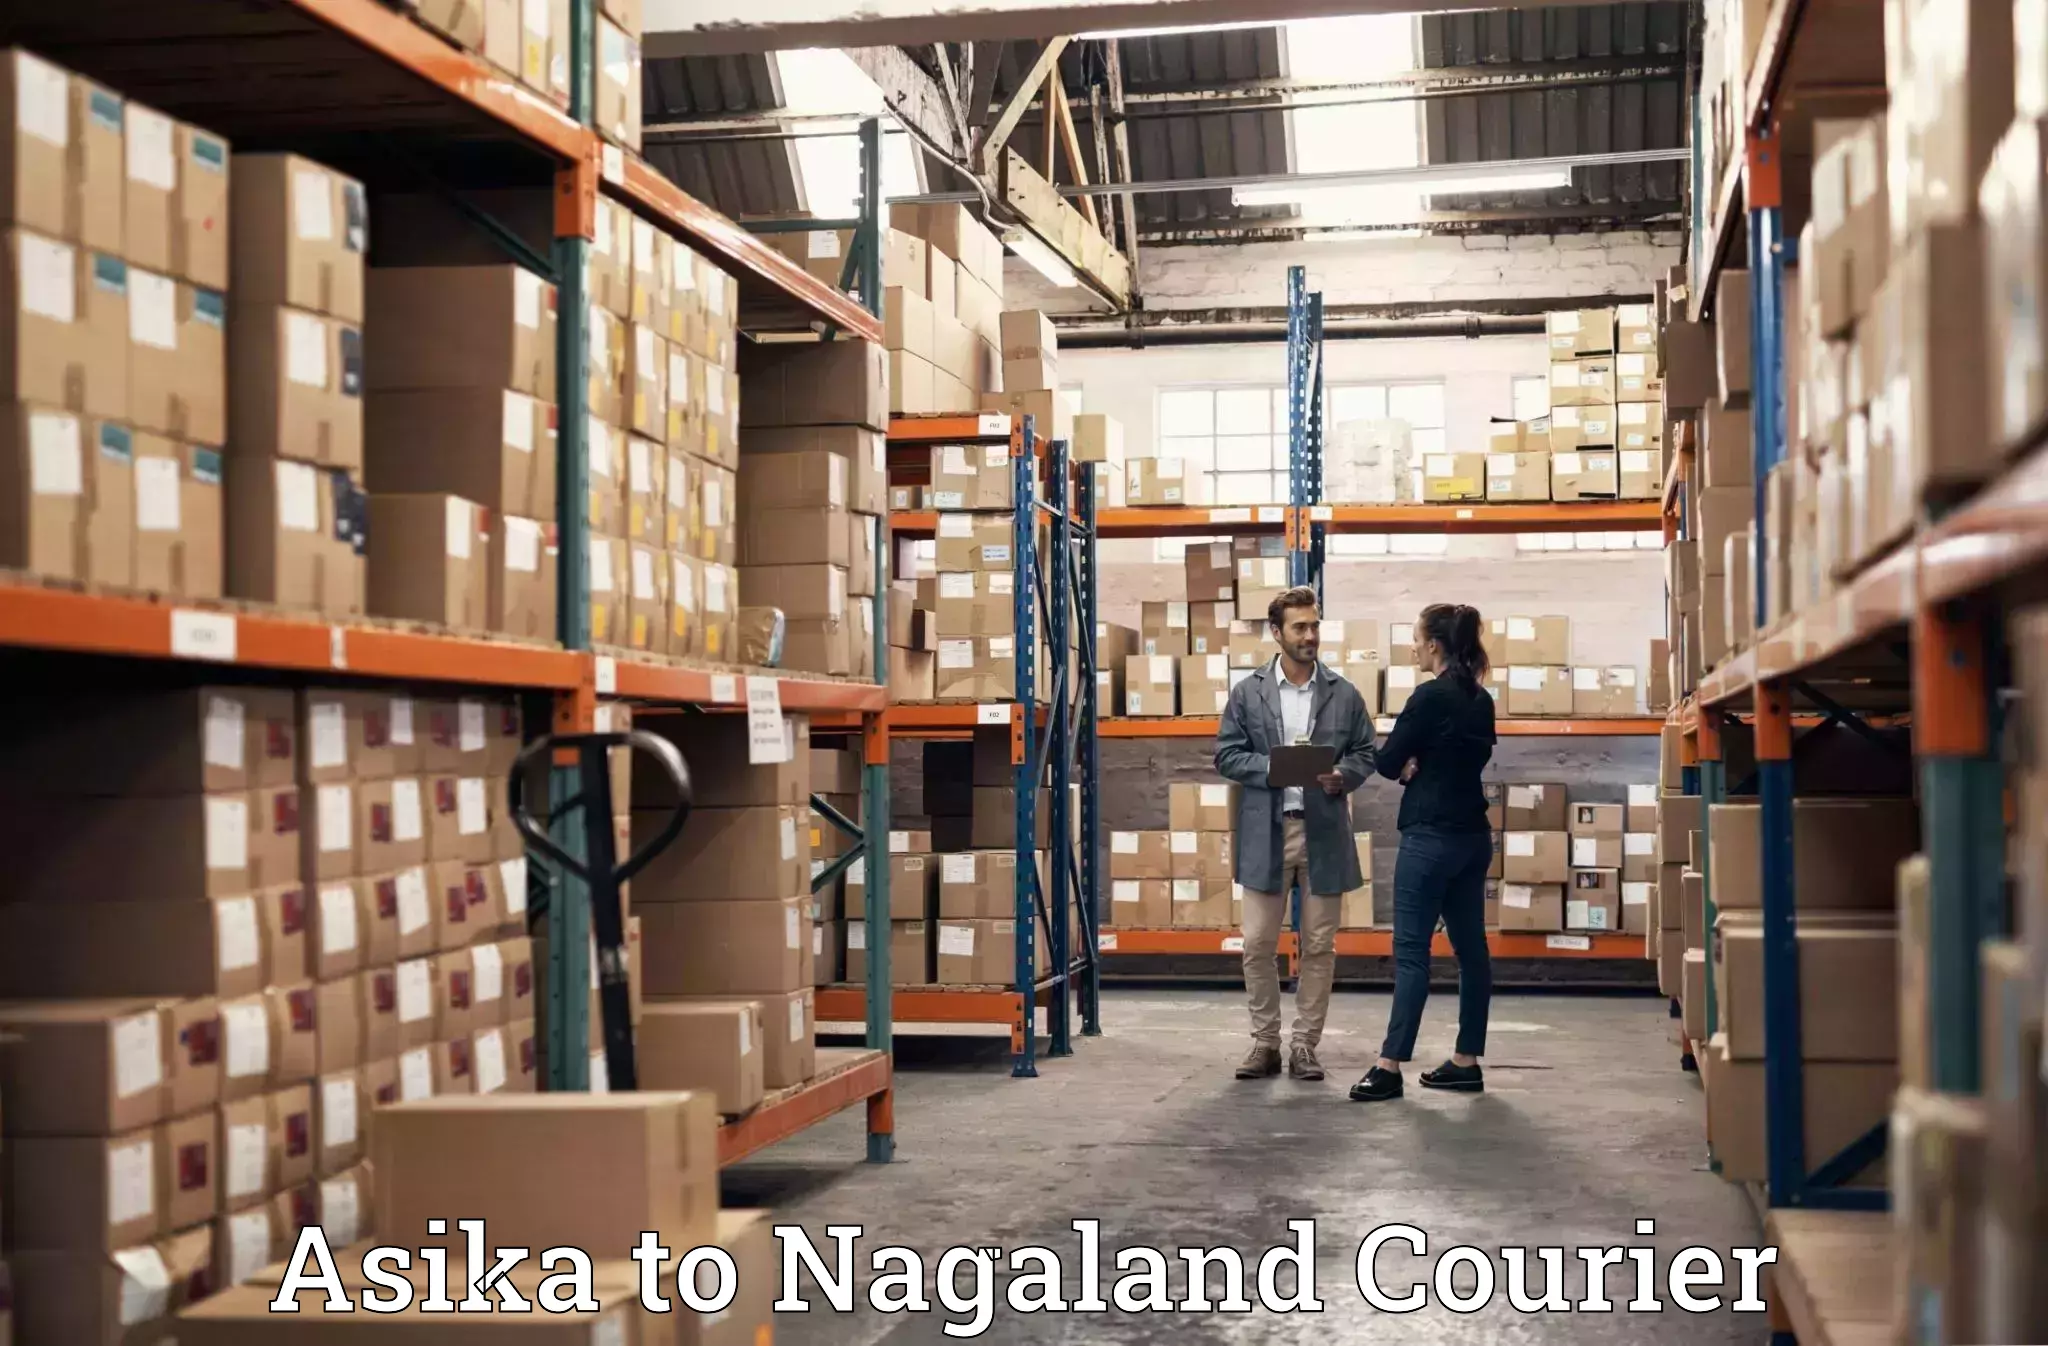 Furniture transport specialists Asika to Nagaland